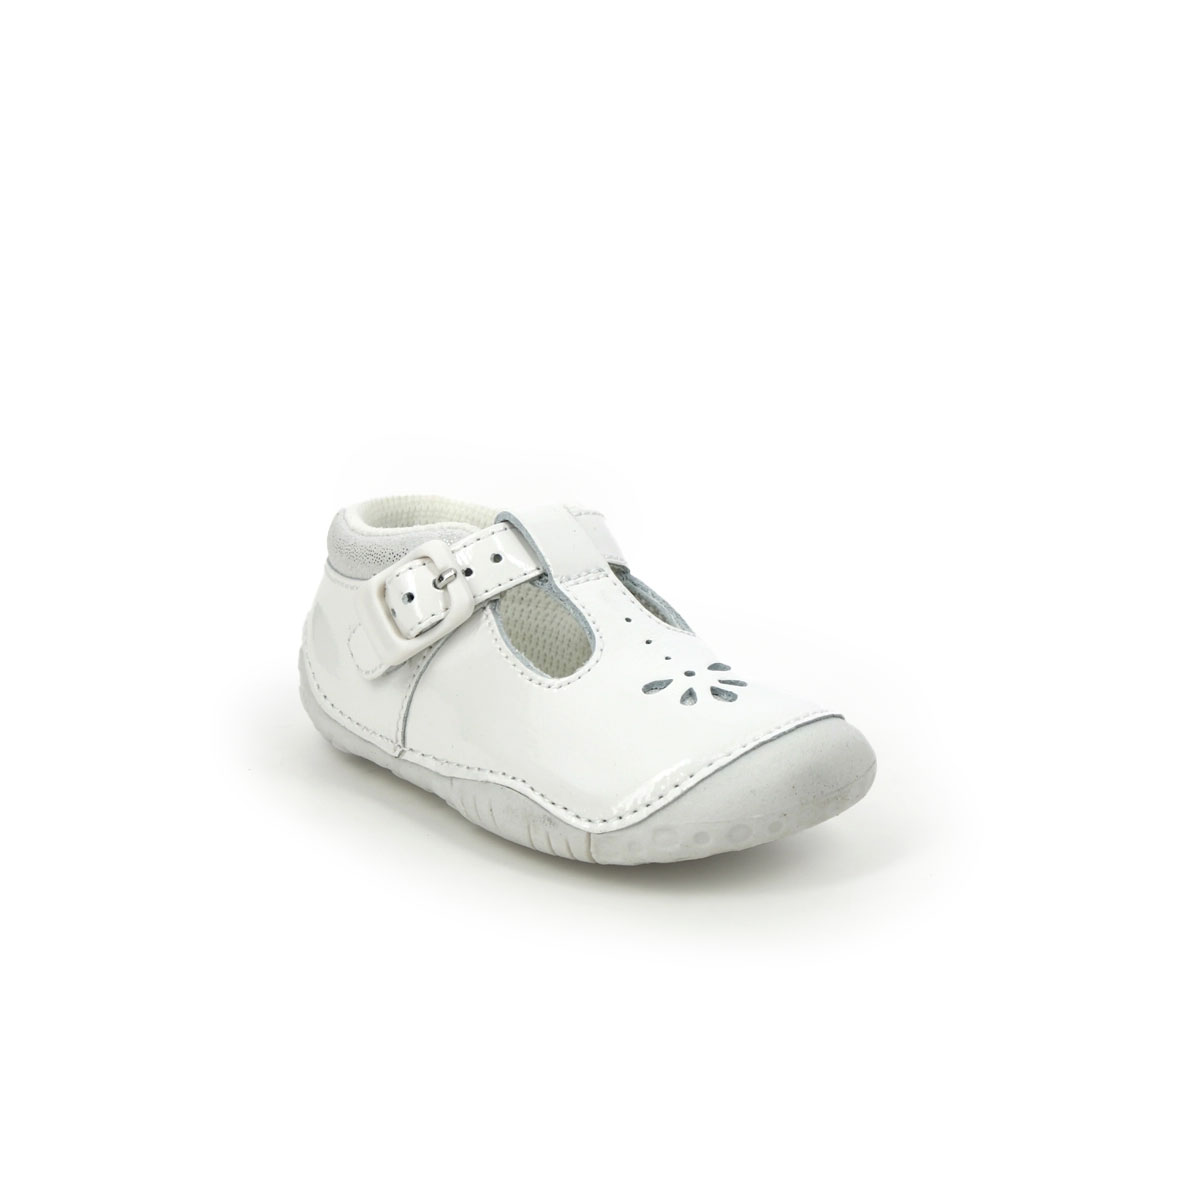 Start Rite - Baby Bubble In White Patent 0773-14F In Size 3.5 In Plain White Patent First And Baby Shoes  In White Patent For kids